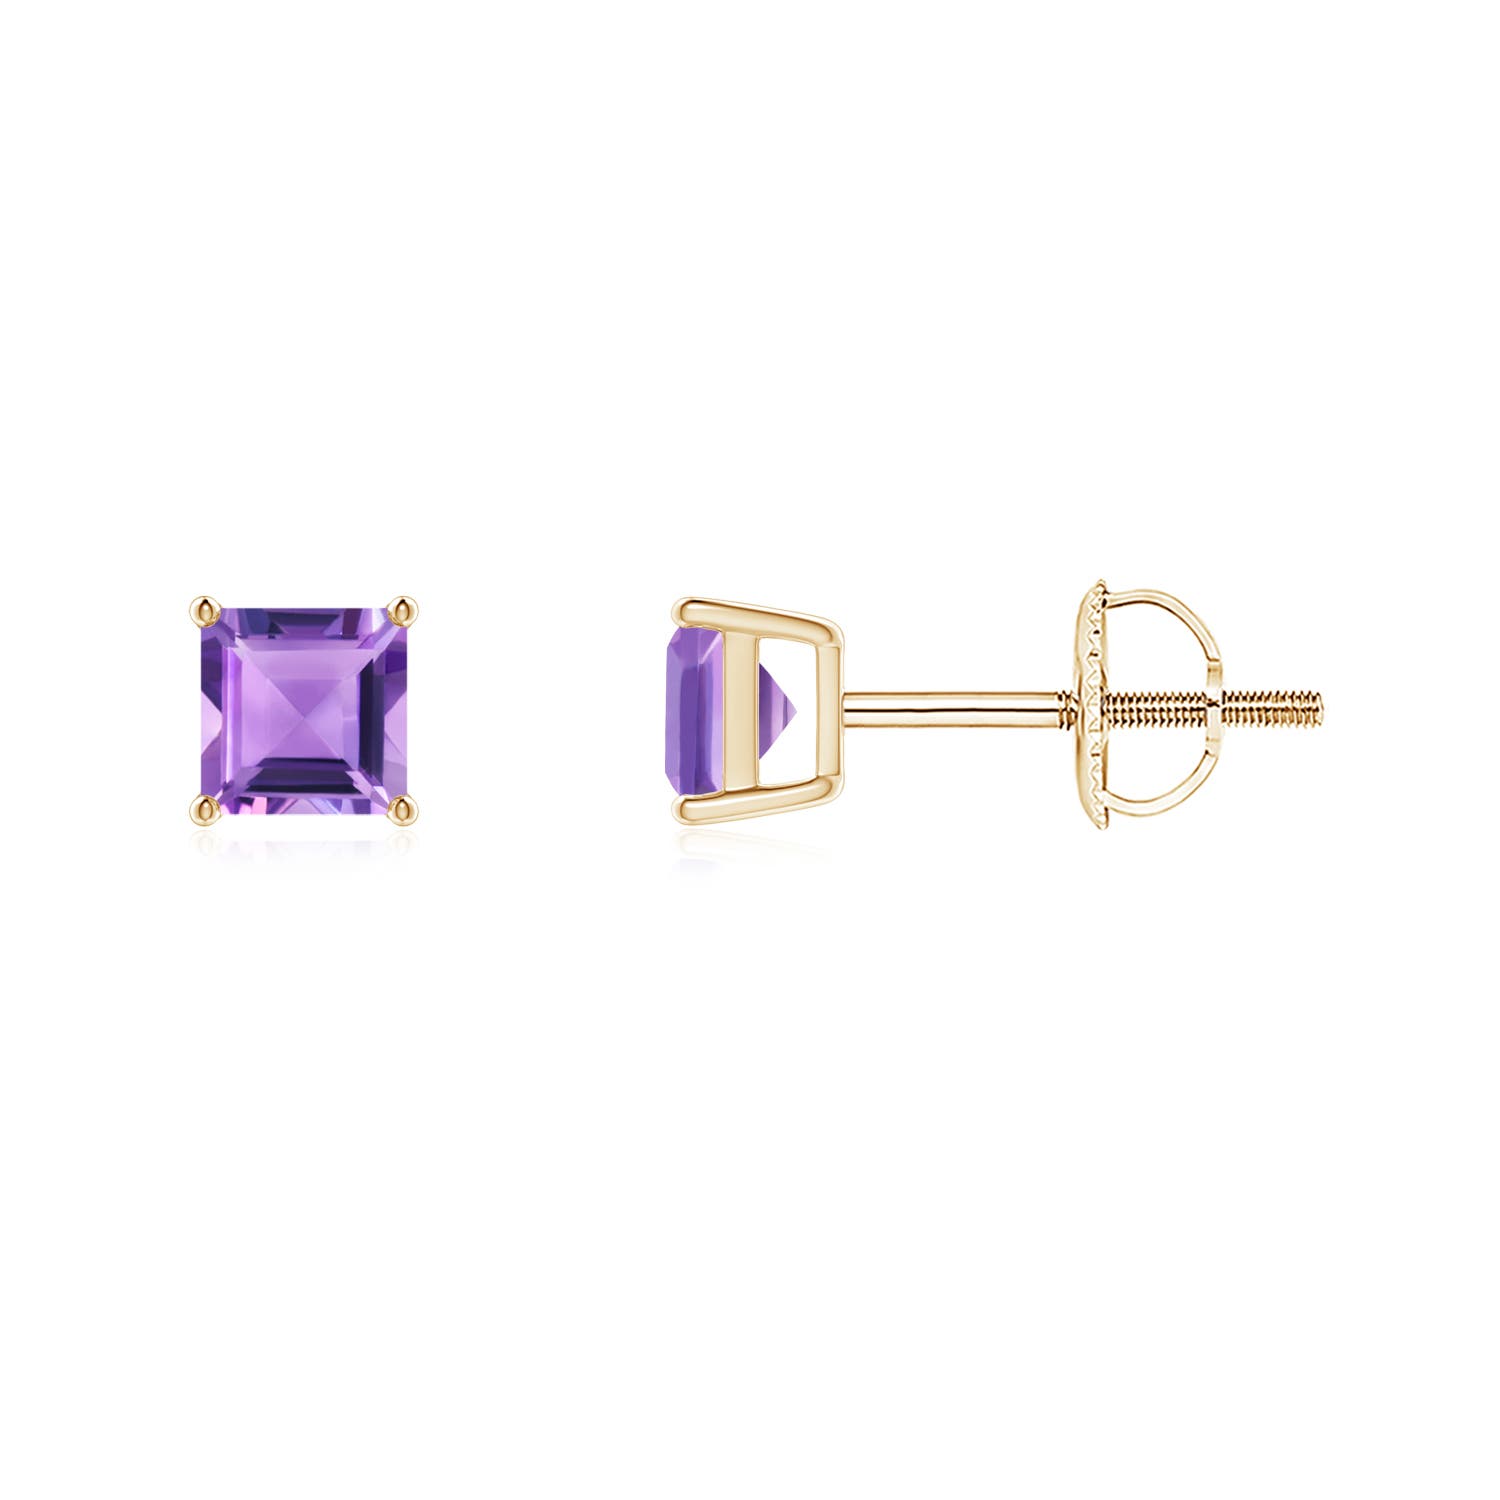 A - Amethyst / 0.66 CT / 14 KT Yellow Gold